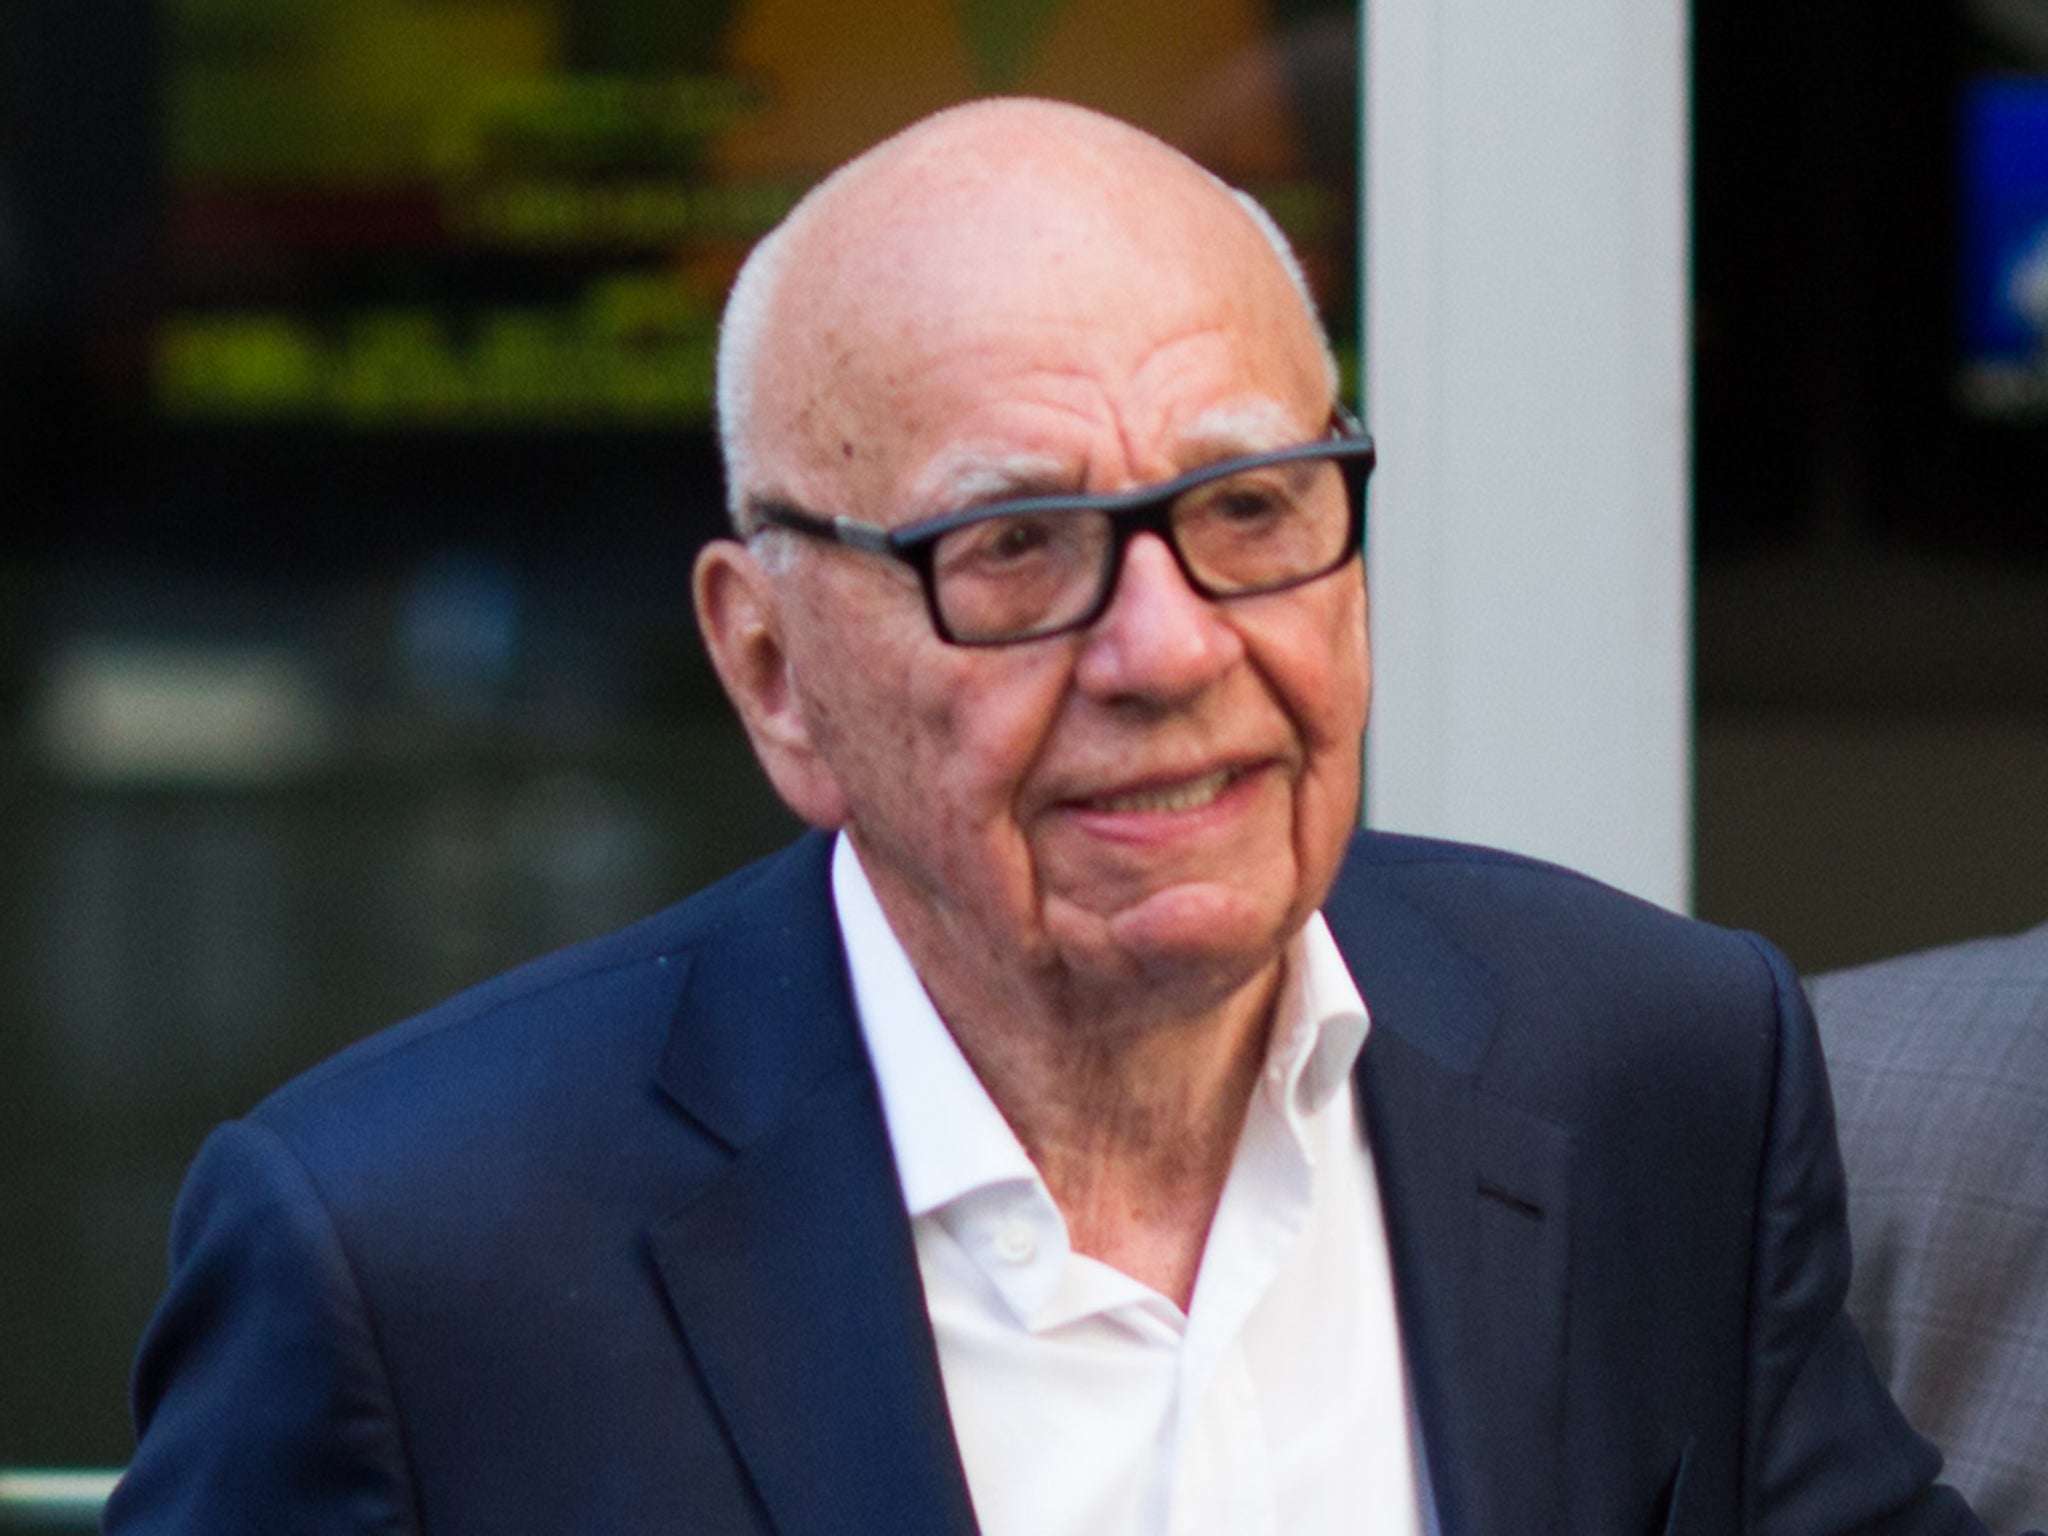 The media mogul’s latest bid comes six years after his last attempt at taking the business over through News Corp